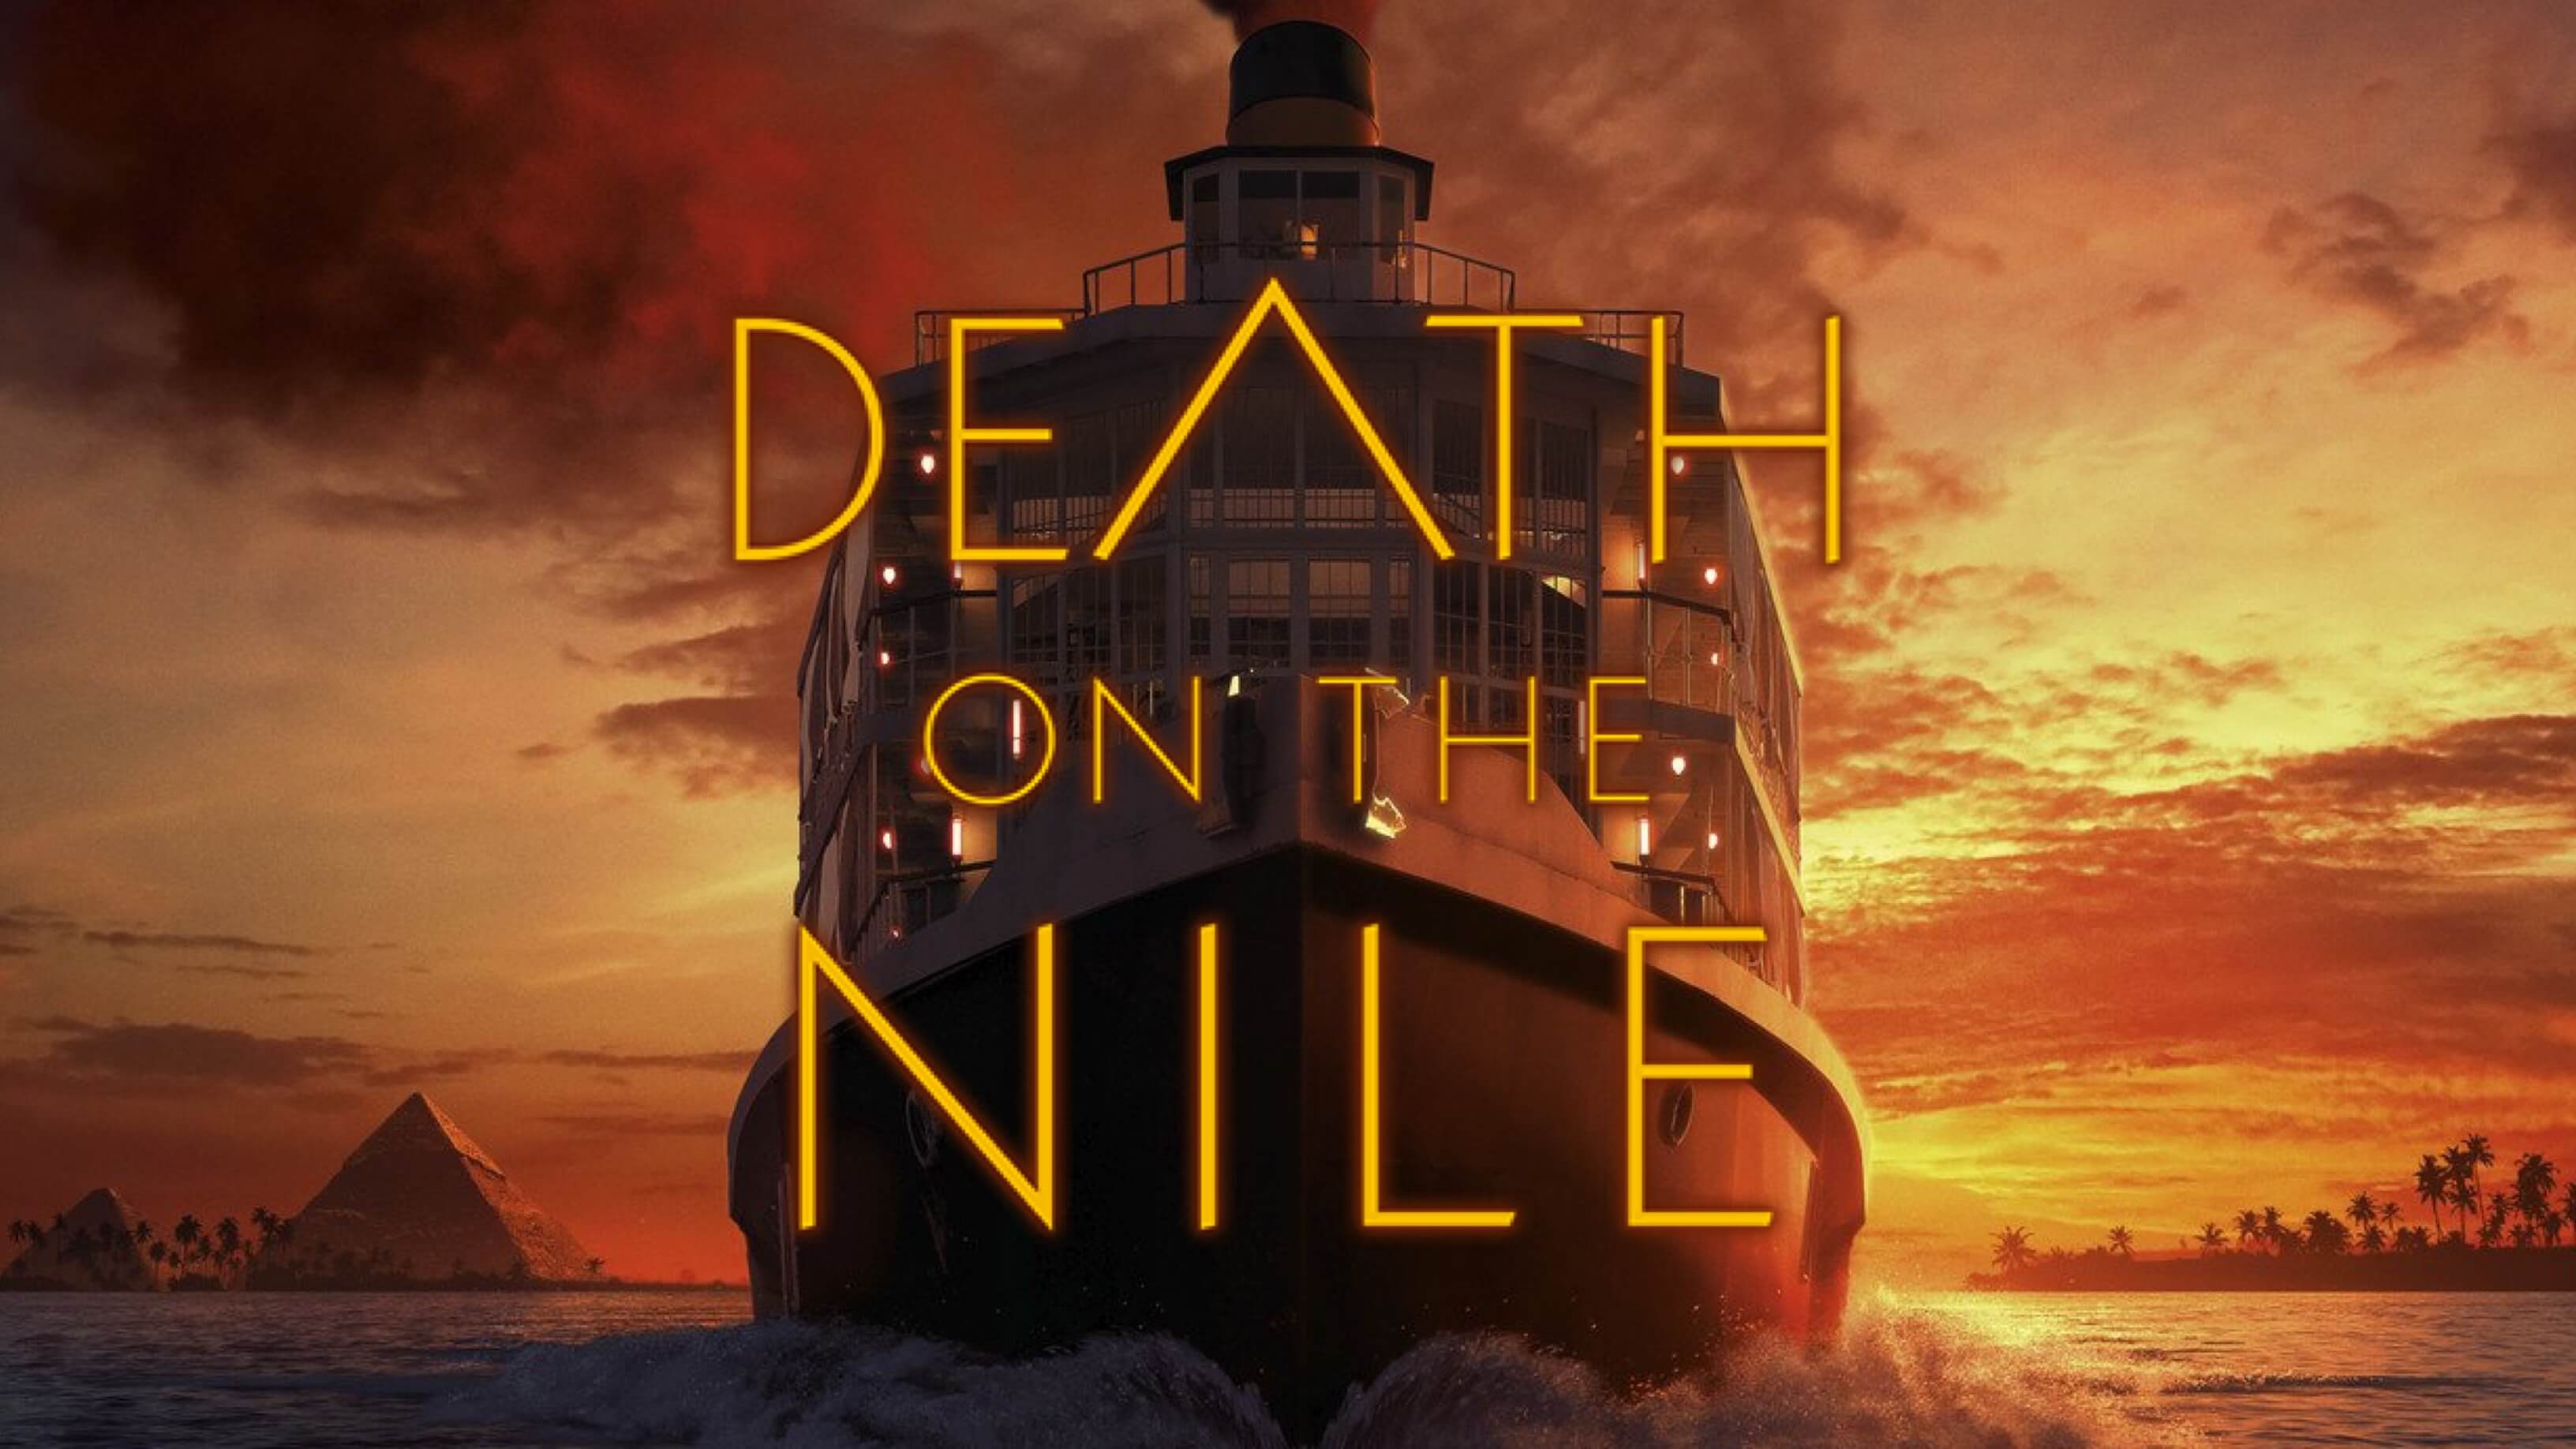 First Trailer and Poster For ‘Death on the Nile’ Have Debuted